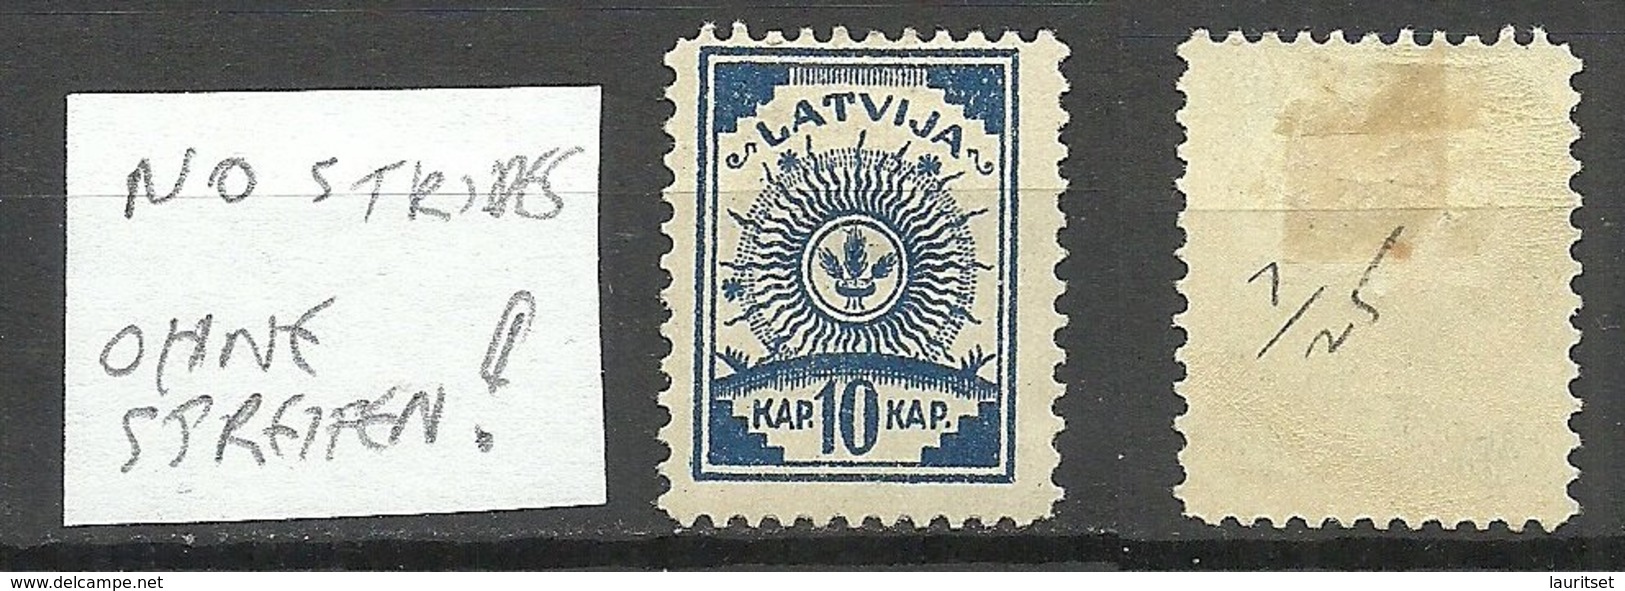 LETTLAND Latvia 1919 Michel 4 A Ohne Linien/without Lines * Randstück - Lettland